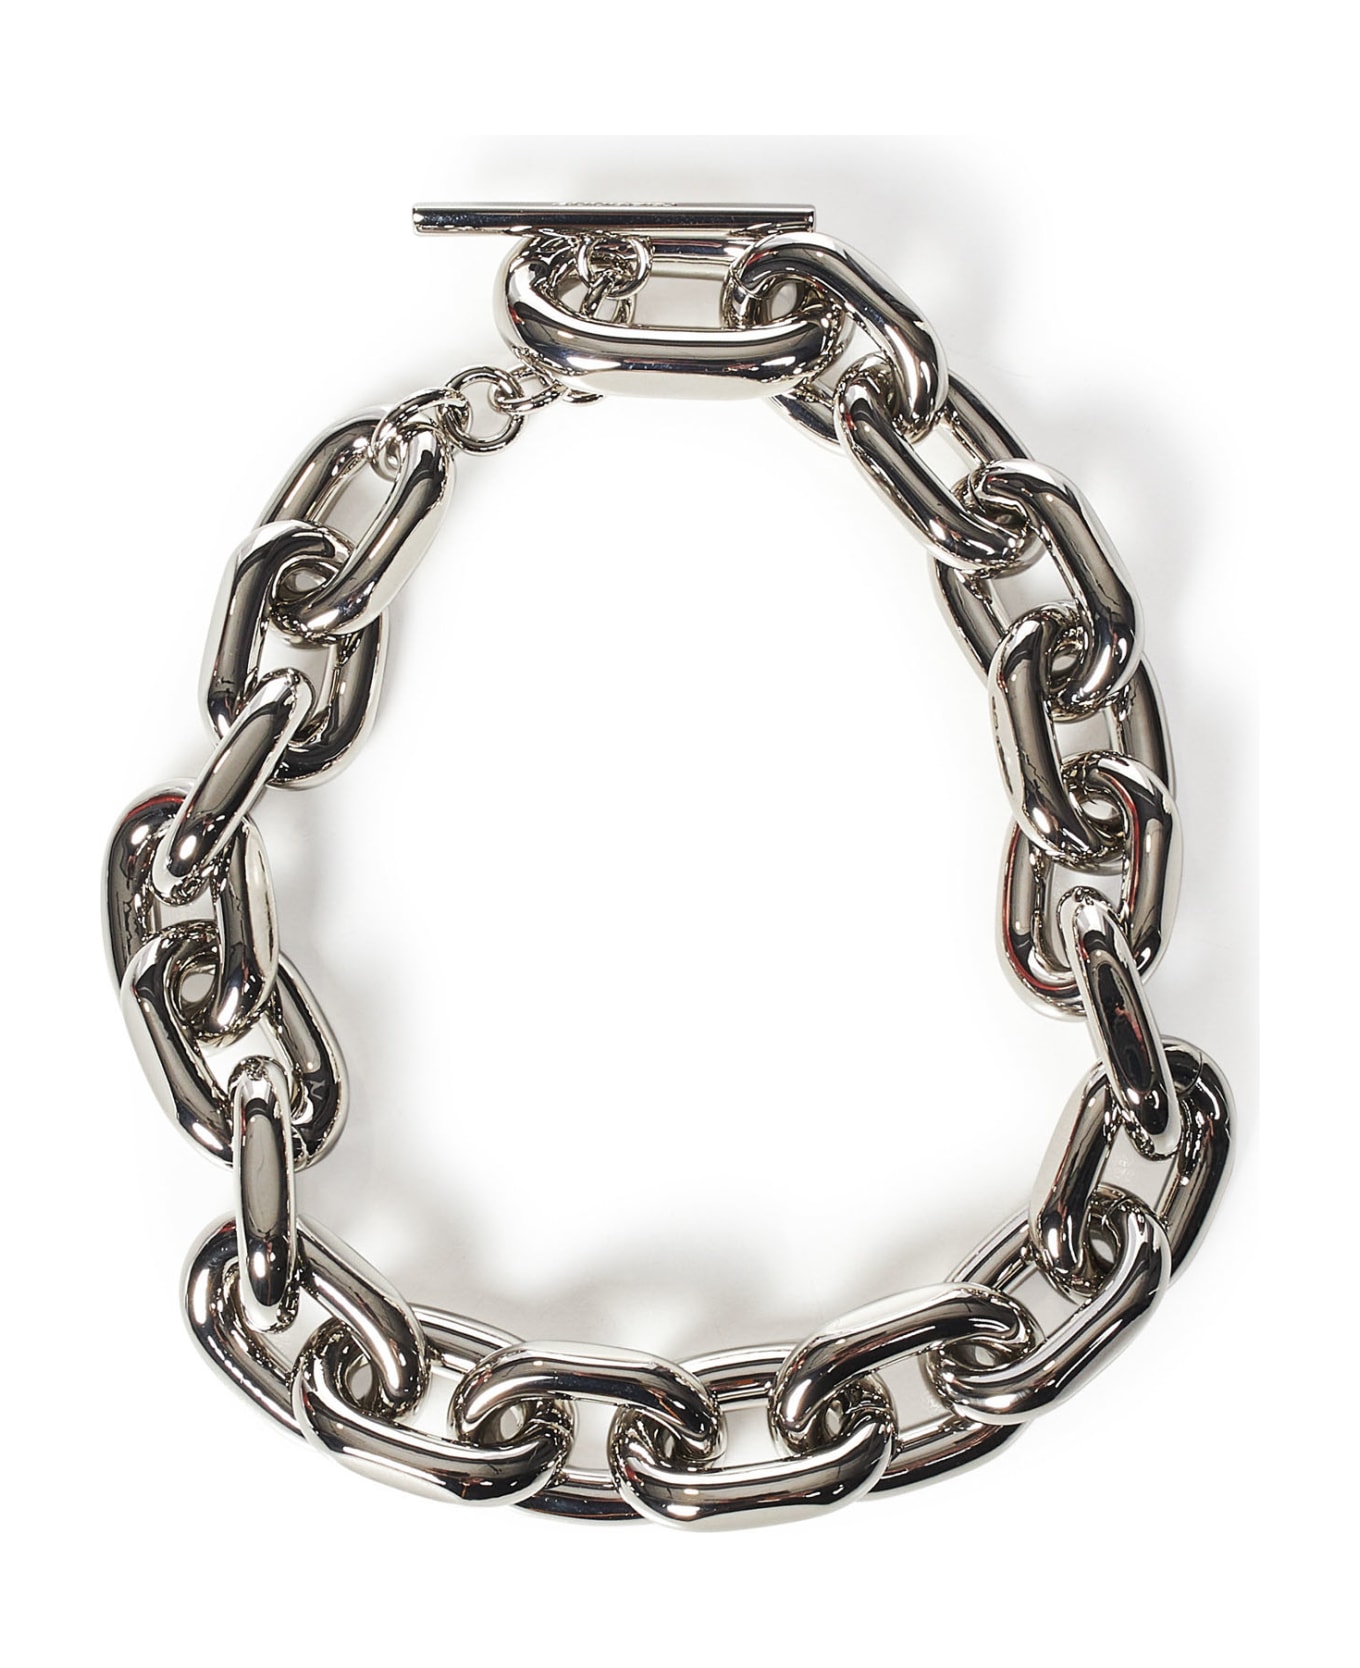 Paco Rabanne Xl Link Necklace - Silver